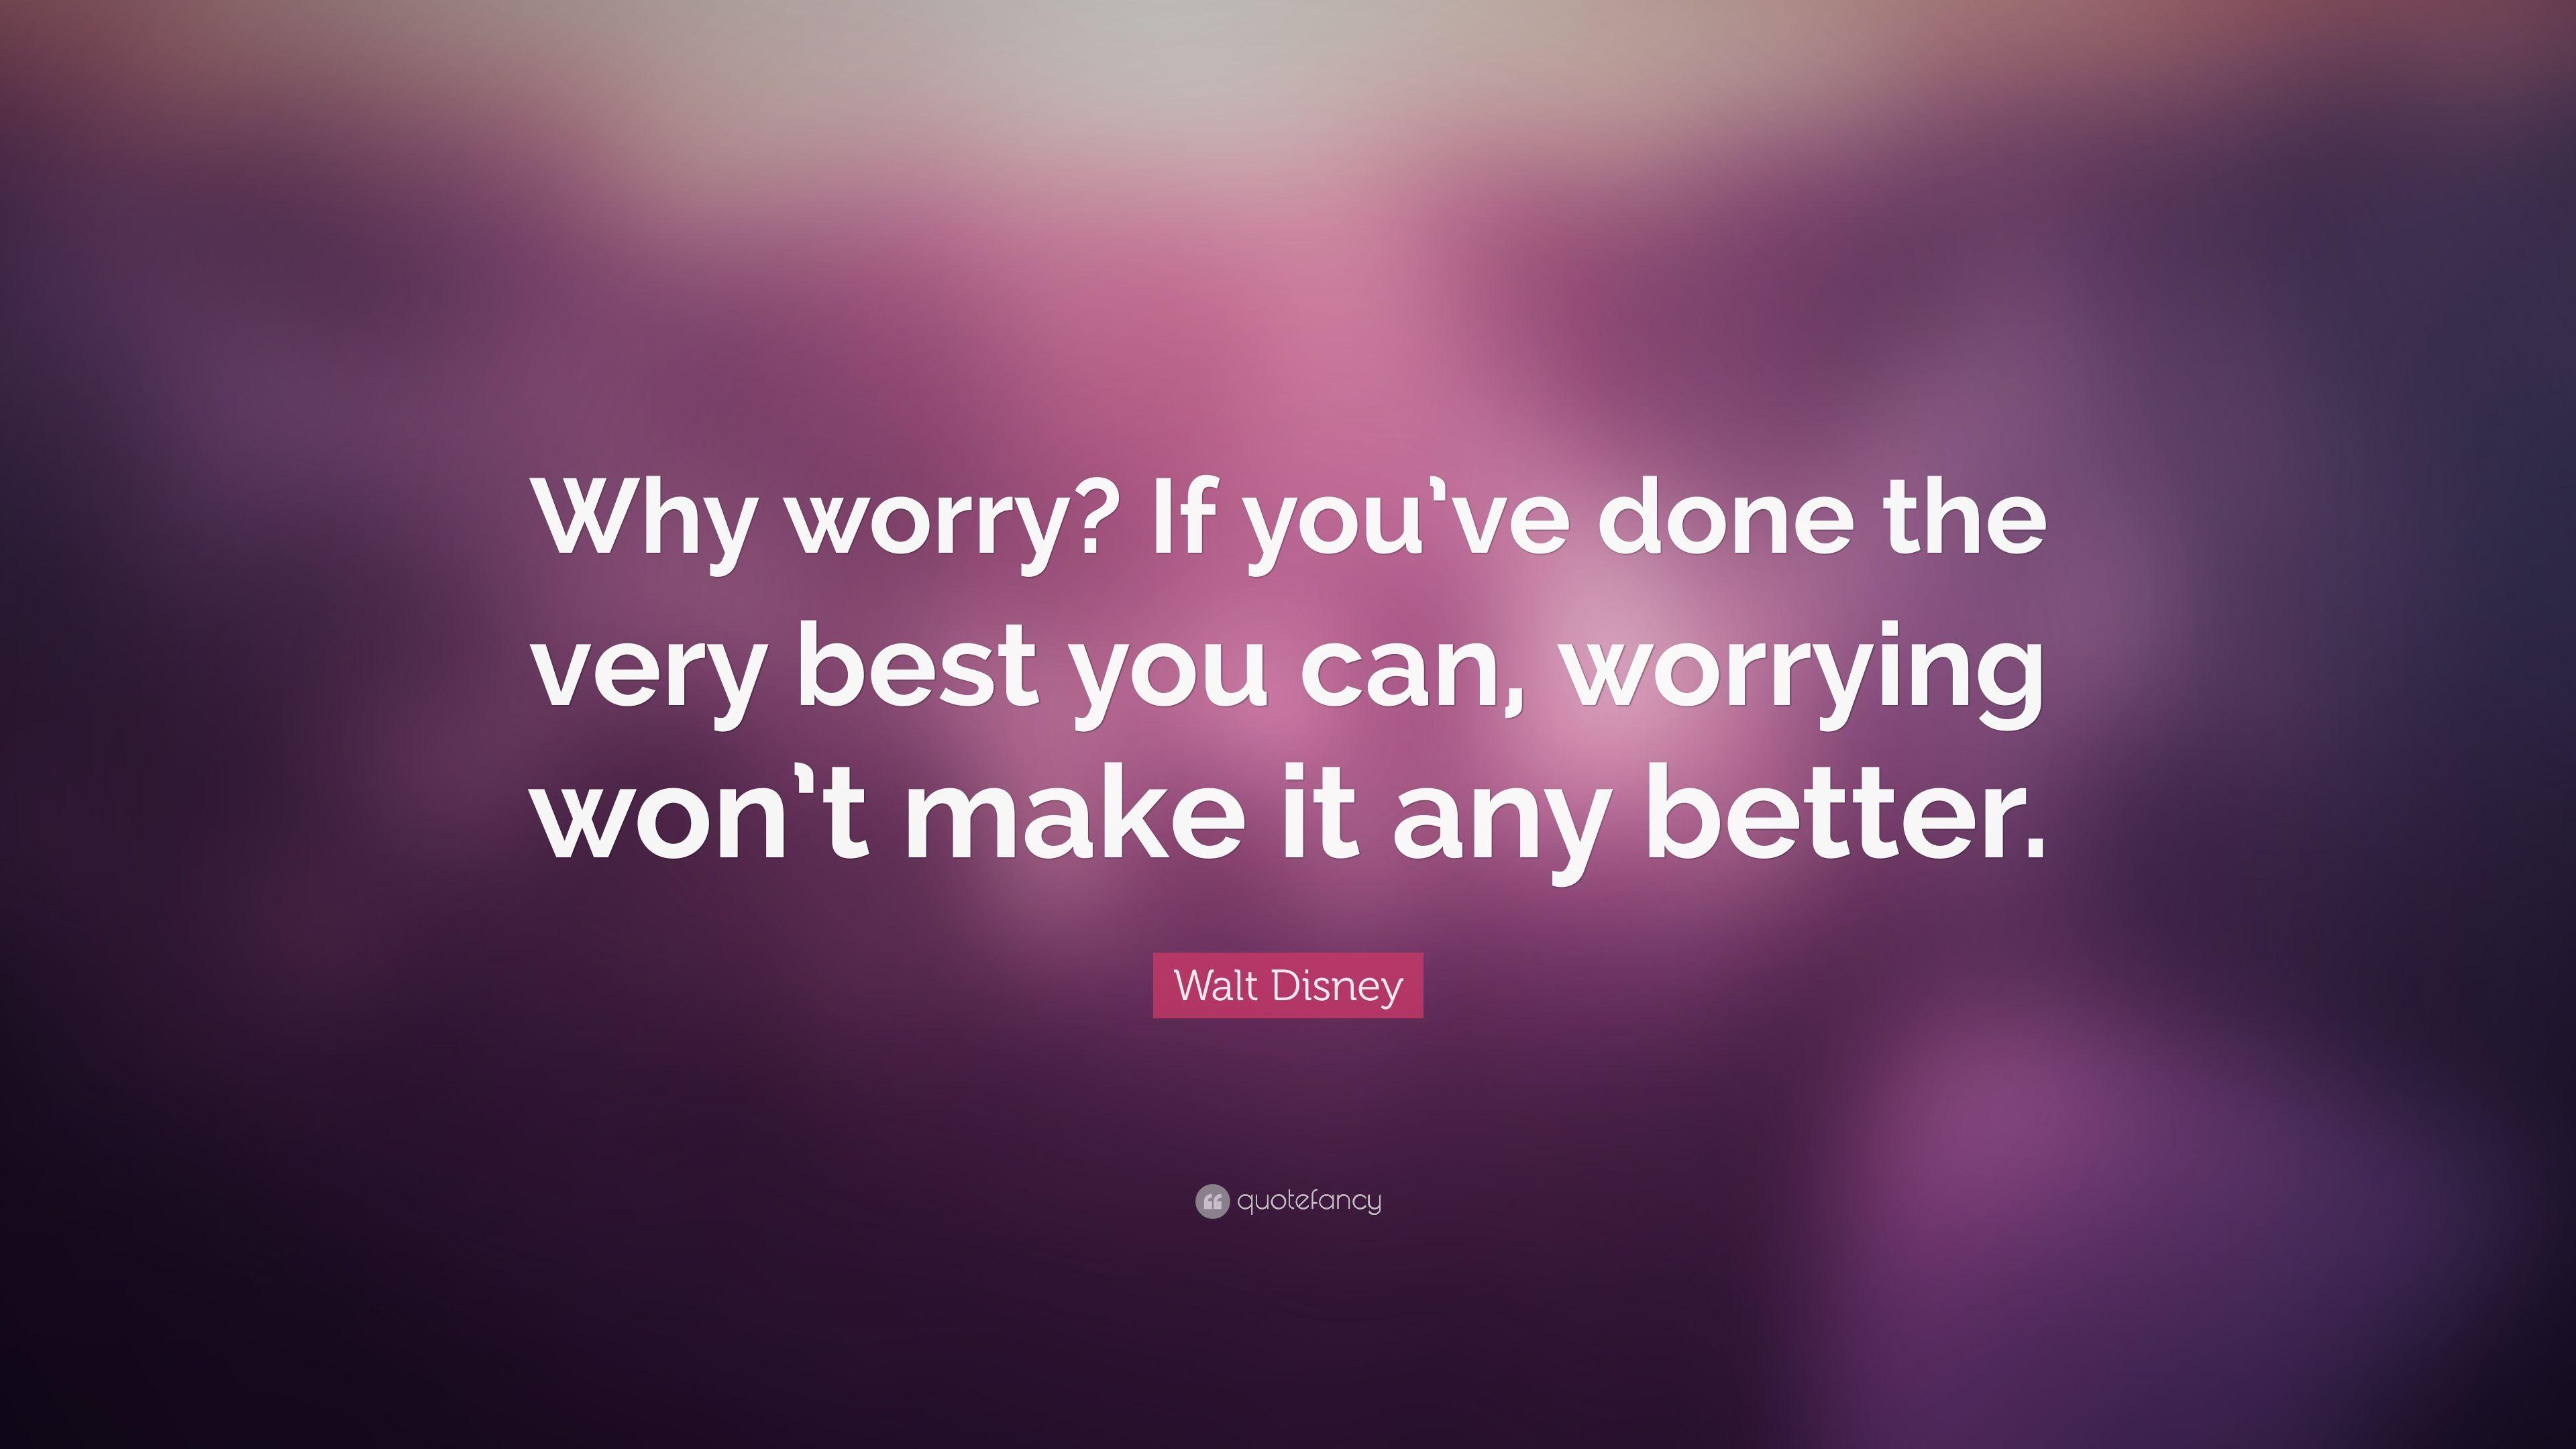 Walt Disney Quote: “Why worry? If you've done the very best you